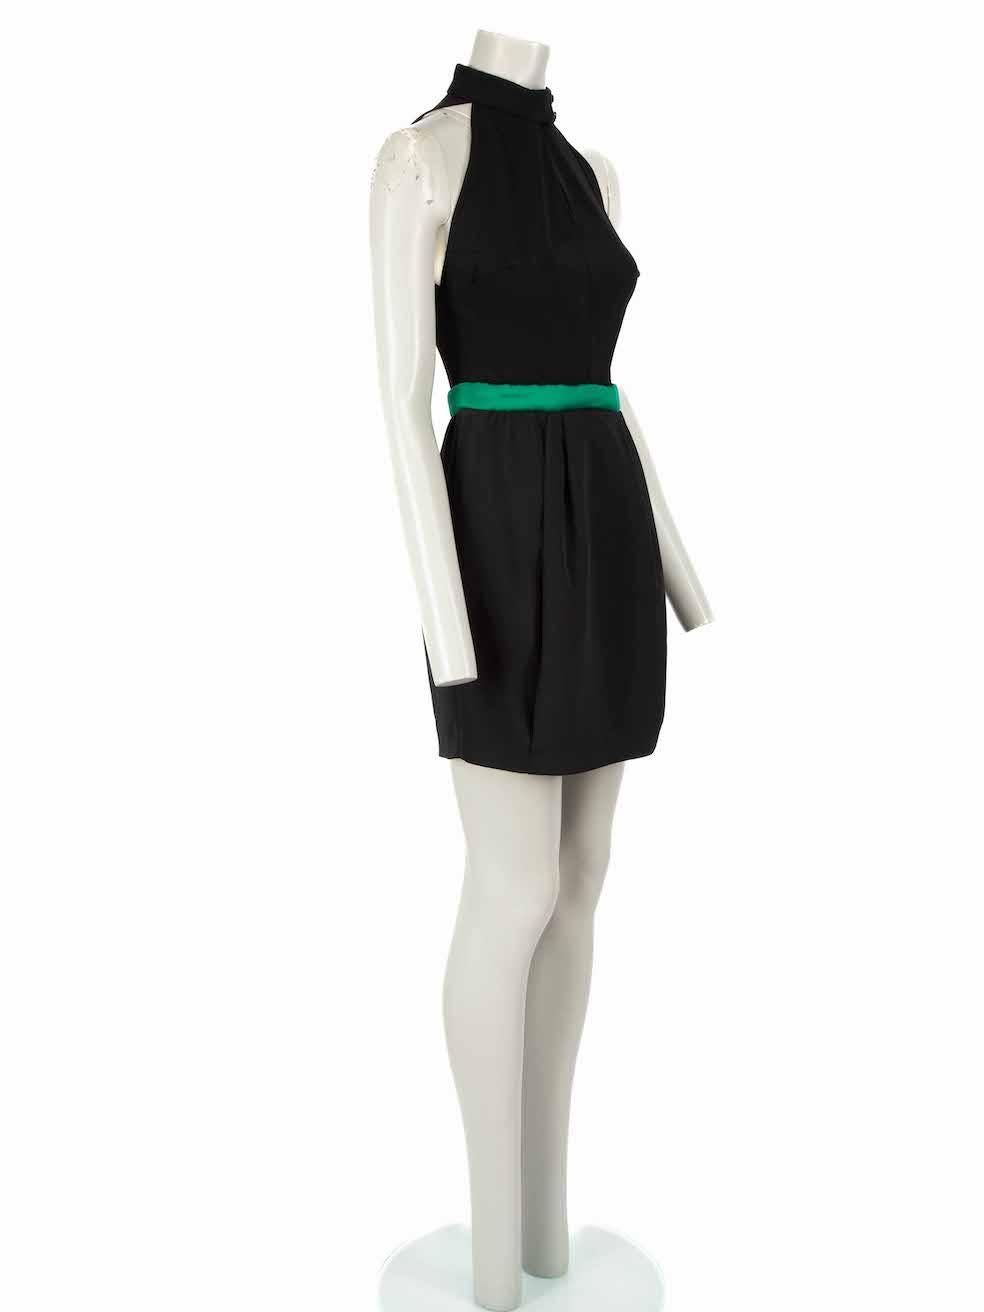 CONDITION is Very good. Minimal wear to dress is evident. Minimal discoloured mark to back of dress, loose stitching to waistband and minor tear to top of zip on this used Balenciaga designer resale item.
 
 Details
 Black
 Synthetic
 Dress
